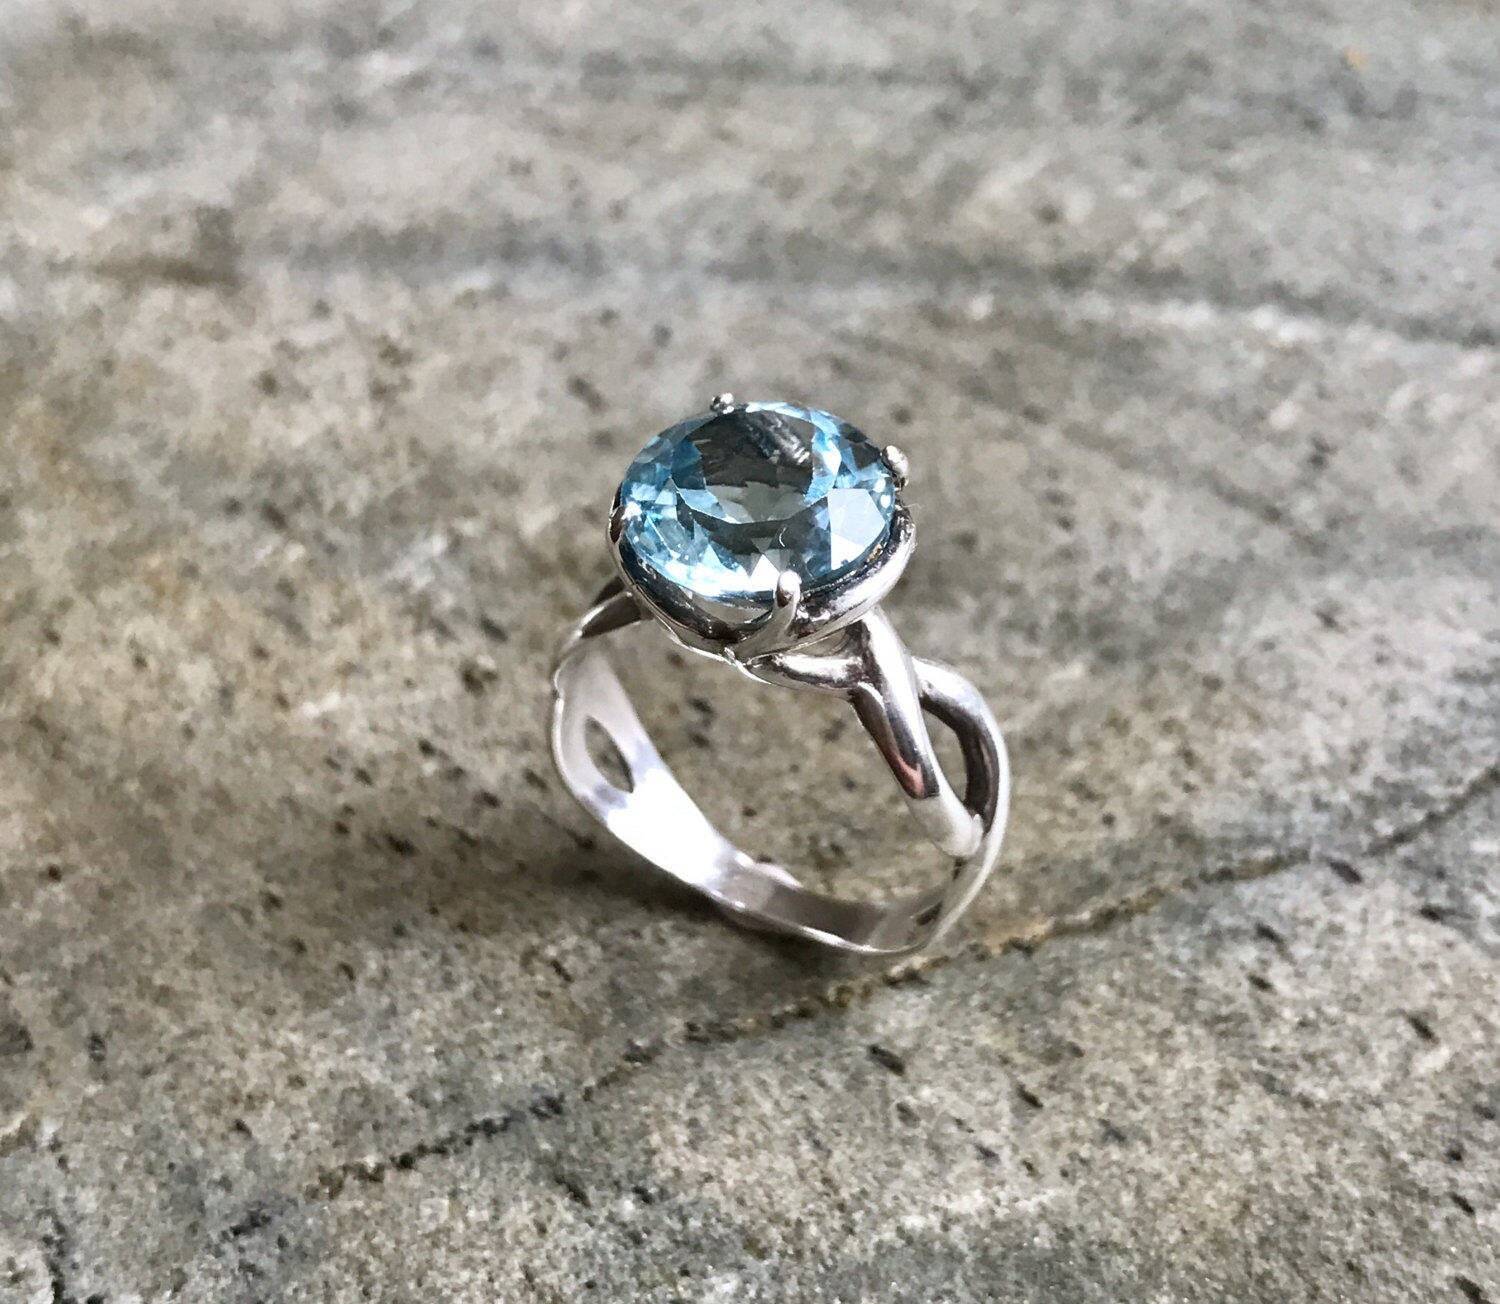 Topaz Engagement Ring, 4 Carat Ring, Natural Blue Topaz, Diamond Cut Ring, Topaz Promise Ring, Blue Topaz, Solid Silver Ring, Topaz SKY